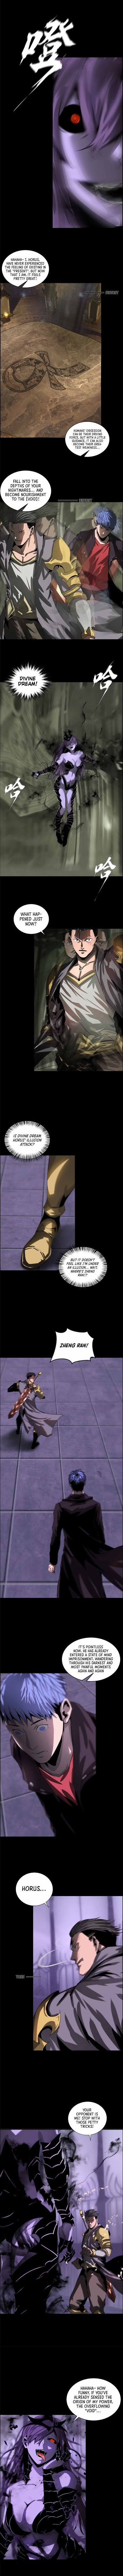 The Blade Of Evolution-Walking Alone In The Dungeon Chapter 43 page 3